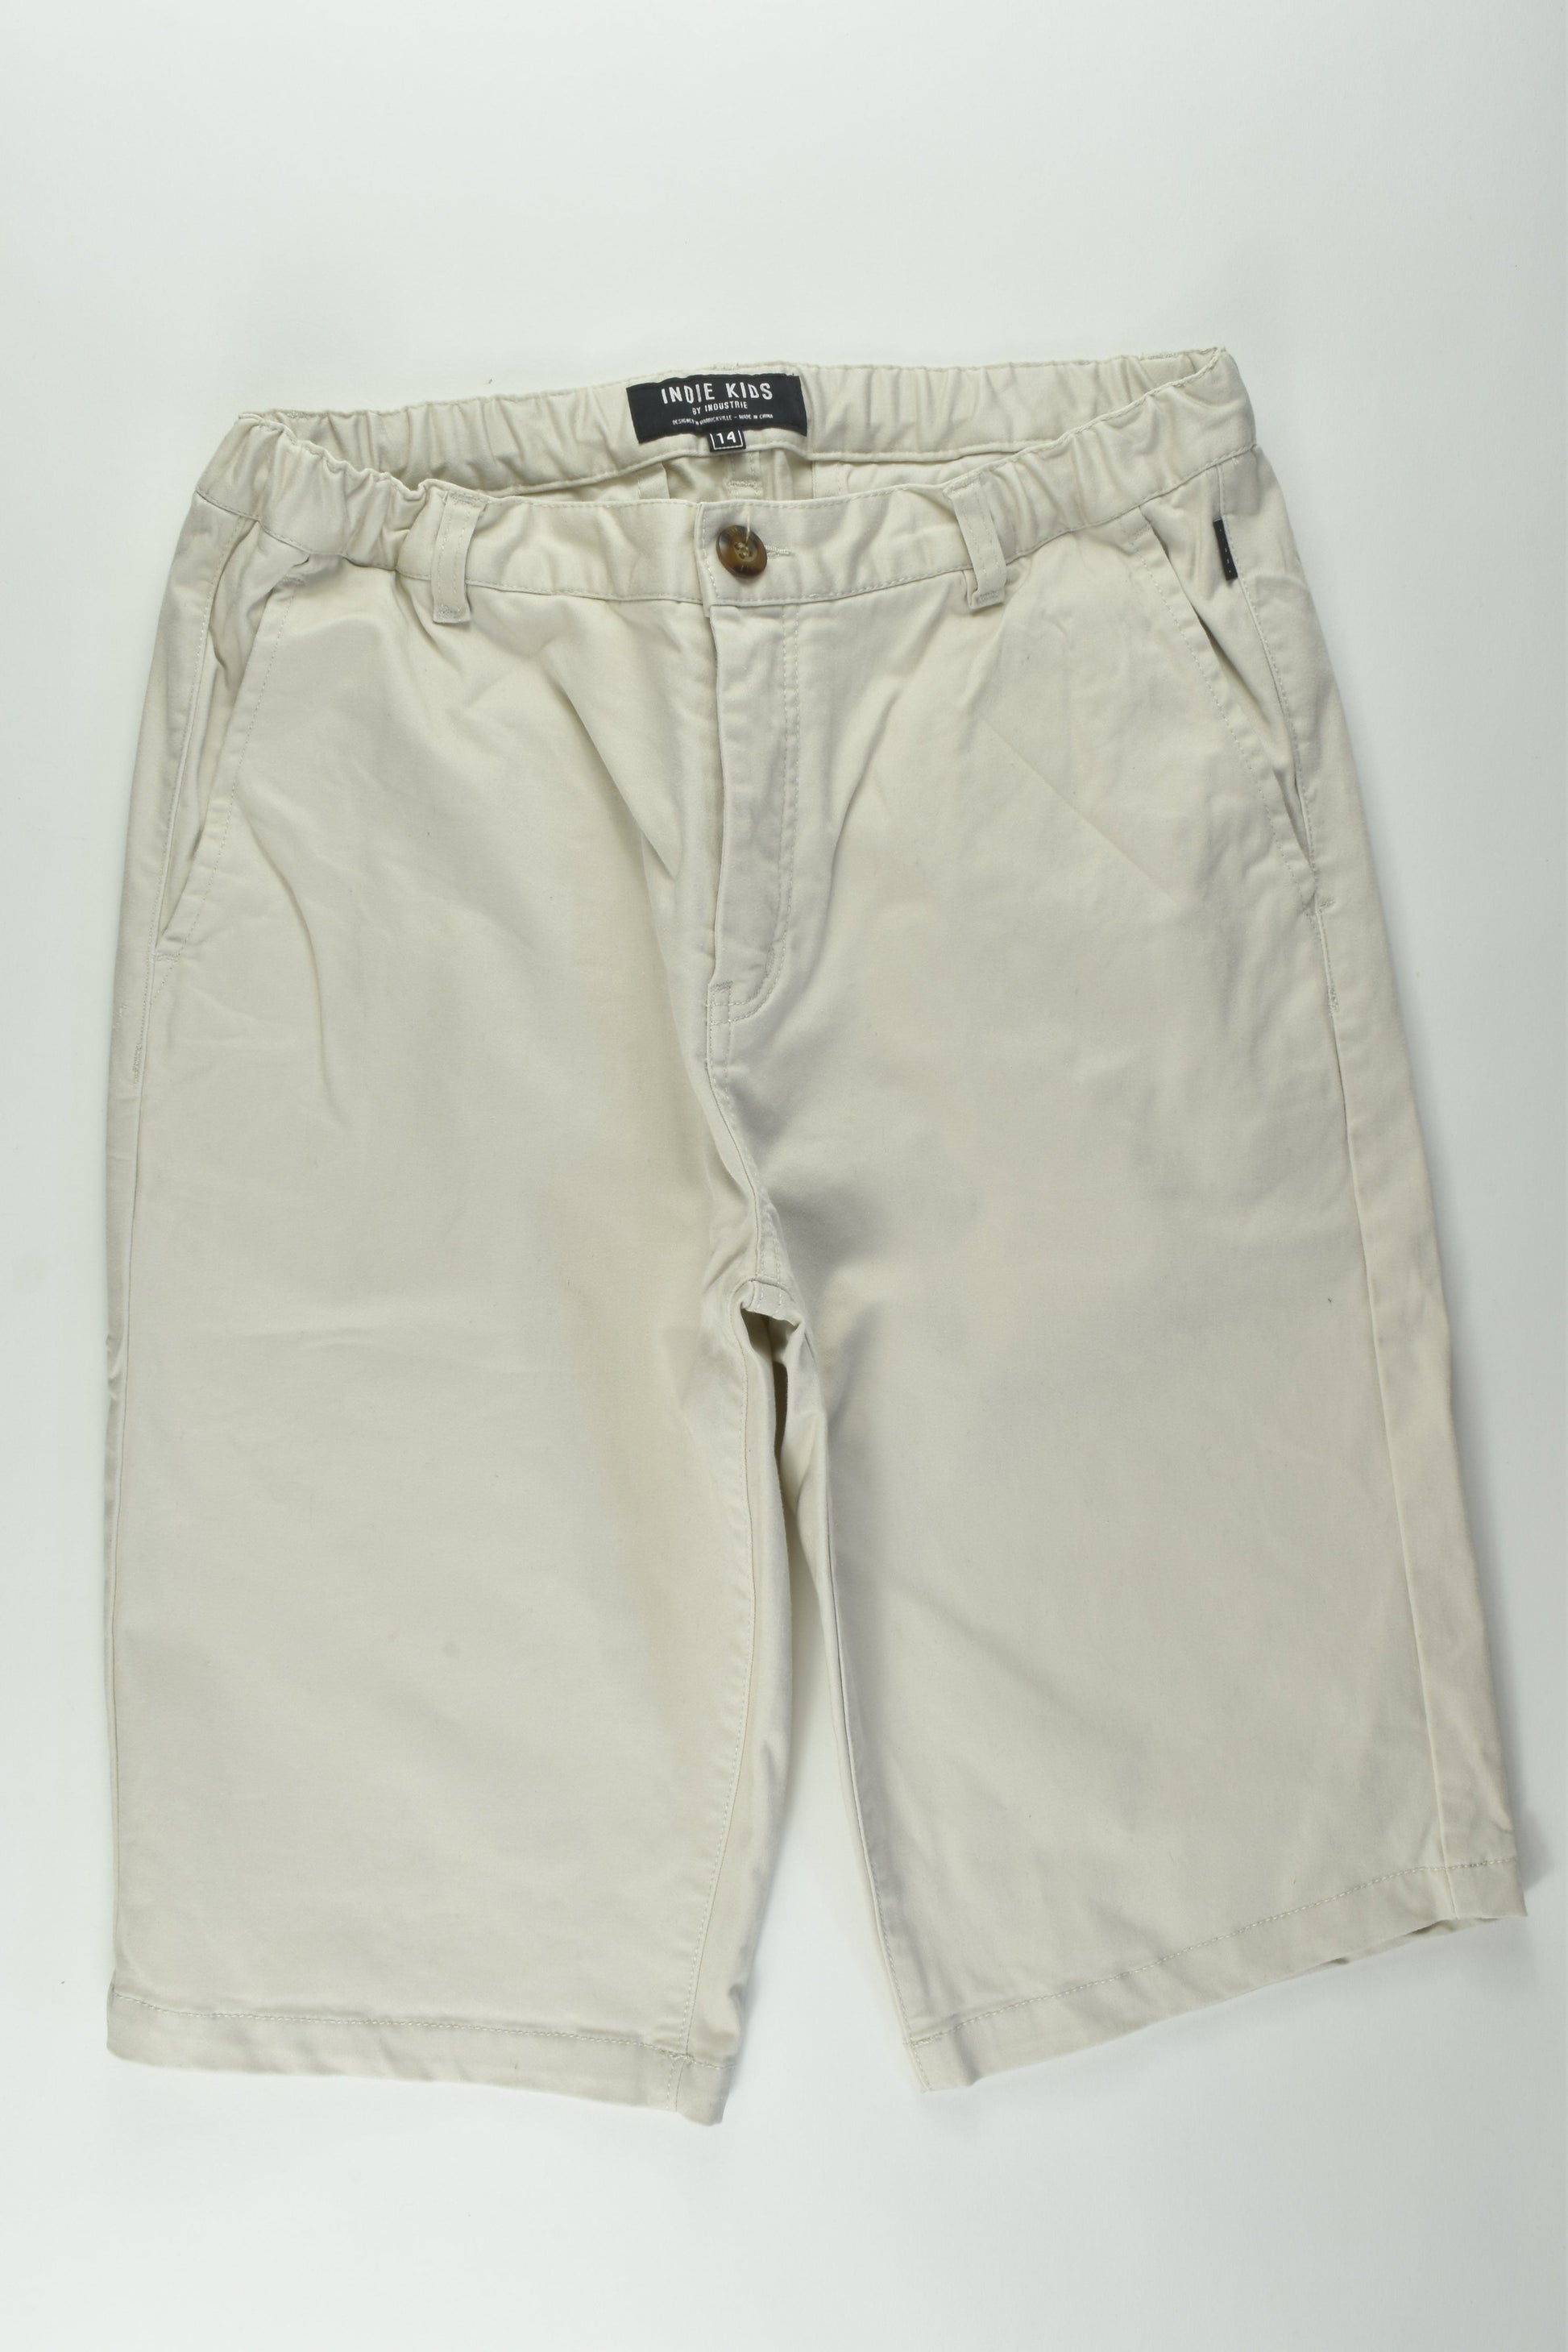 Indie Kids by Industrie Size 14 Chino Shorts